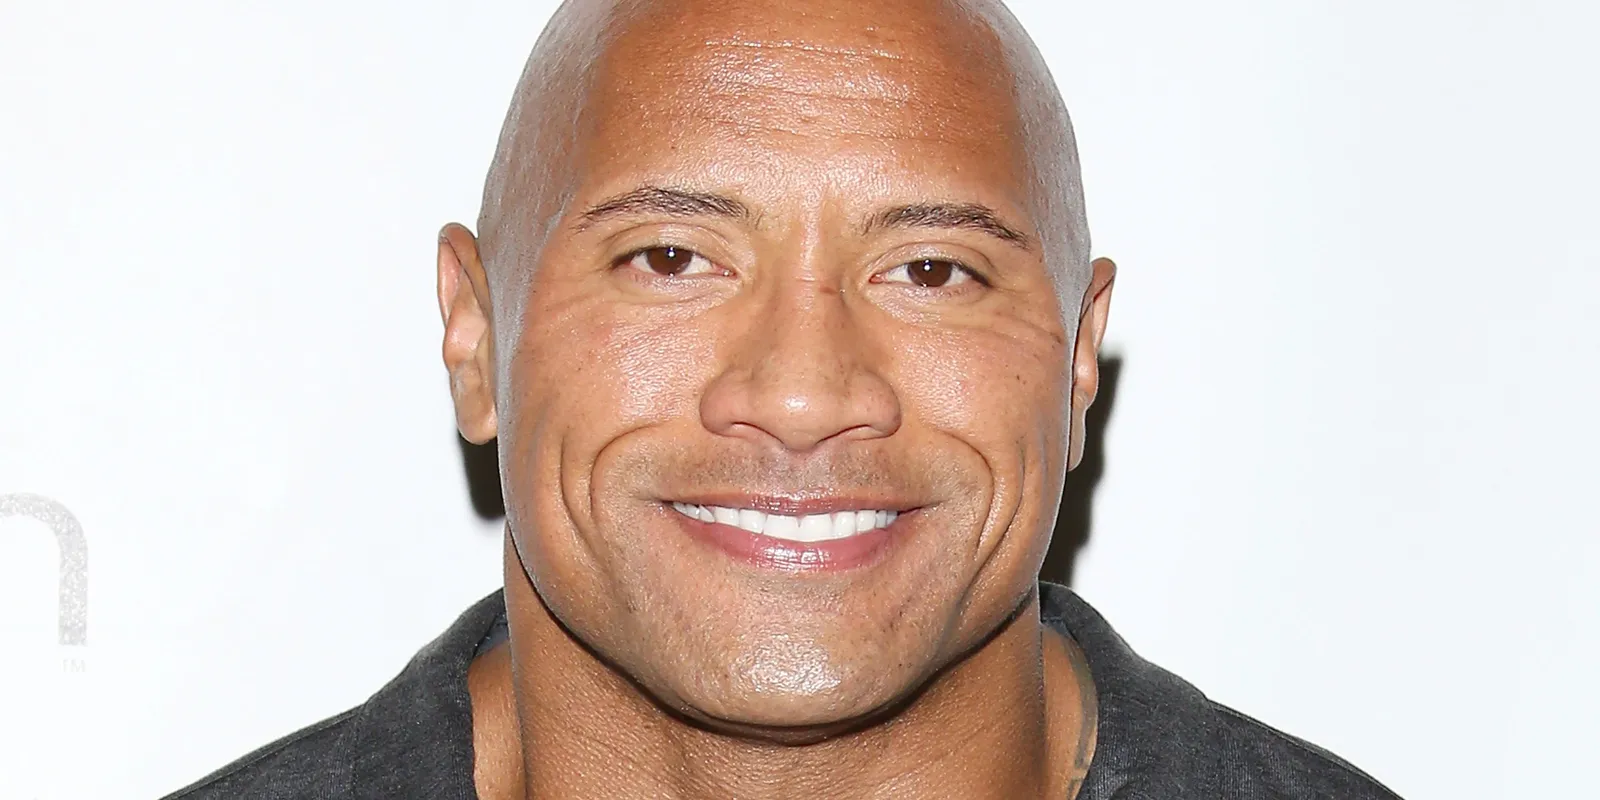 The Rock’s Response to Death Threats Targeting His Daughter, Ava